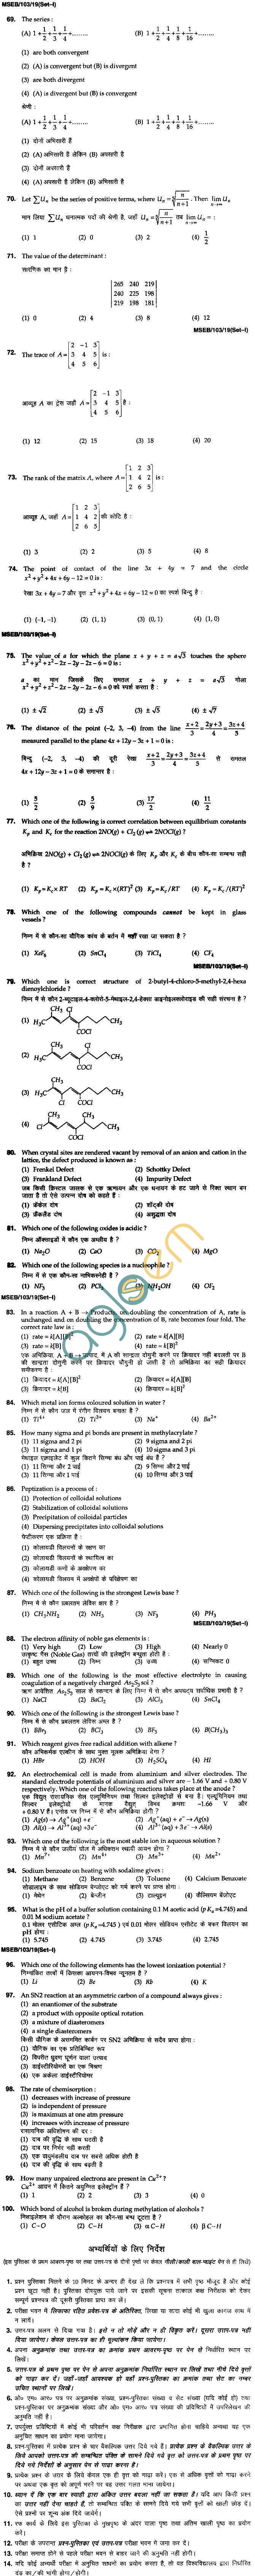 BHU UET 2010 B.Ed. Physical Science Question Paper 